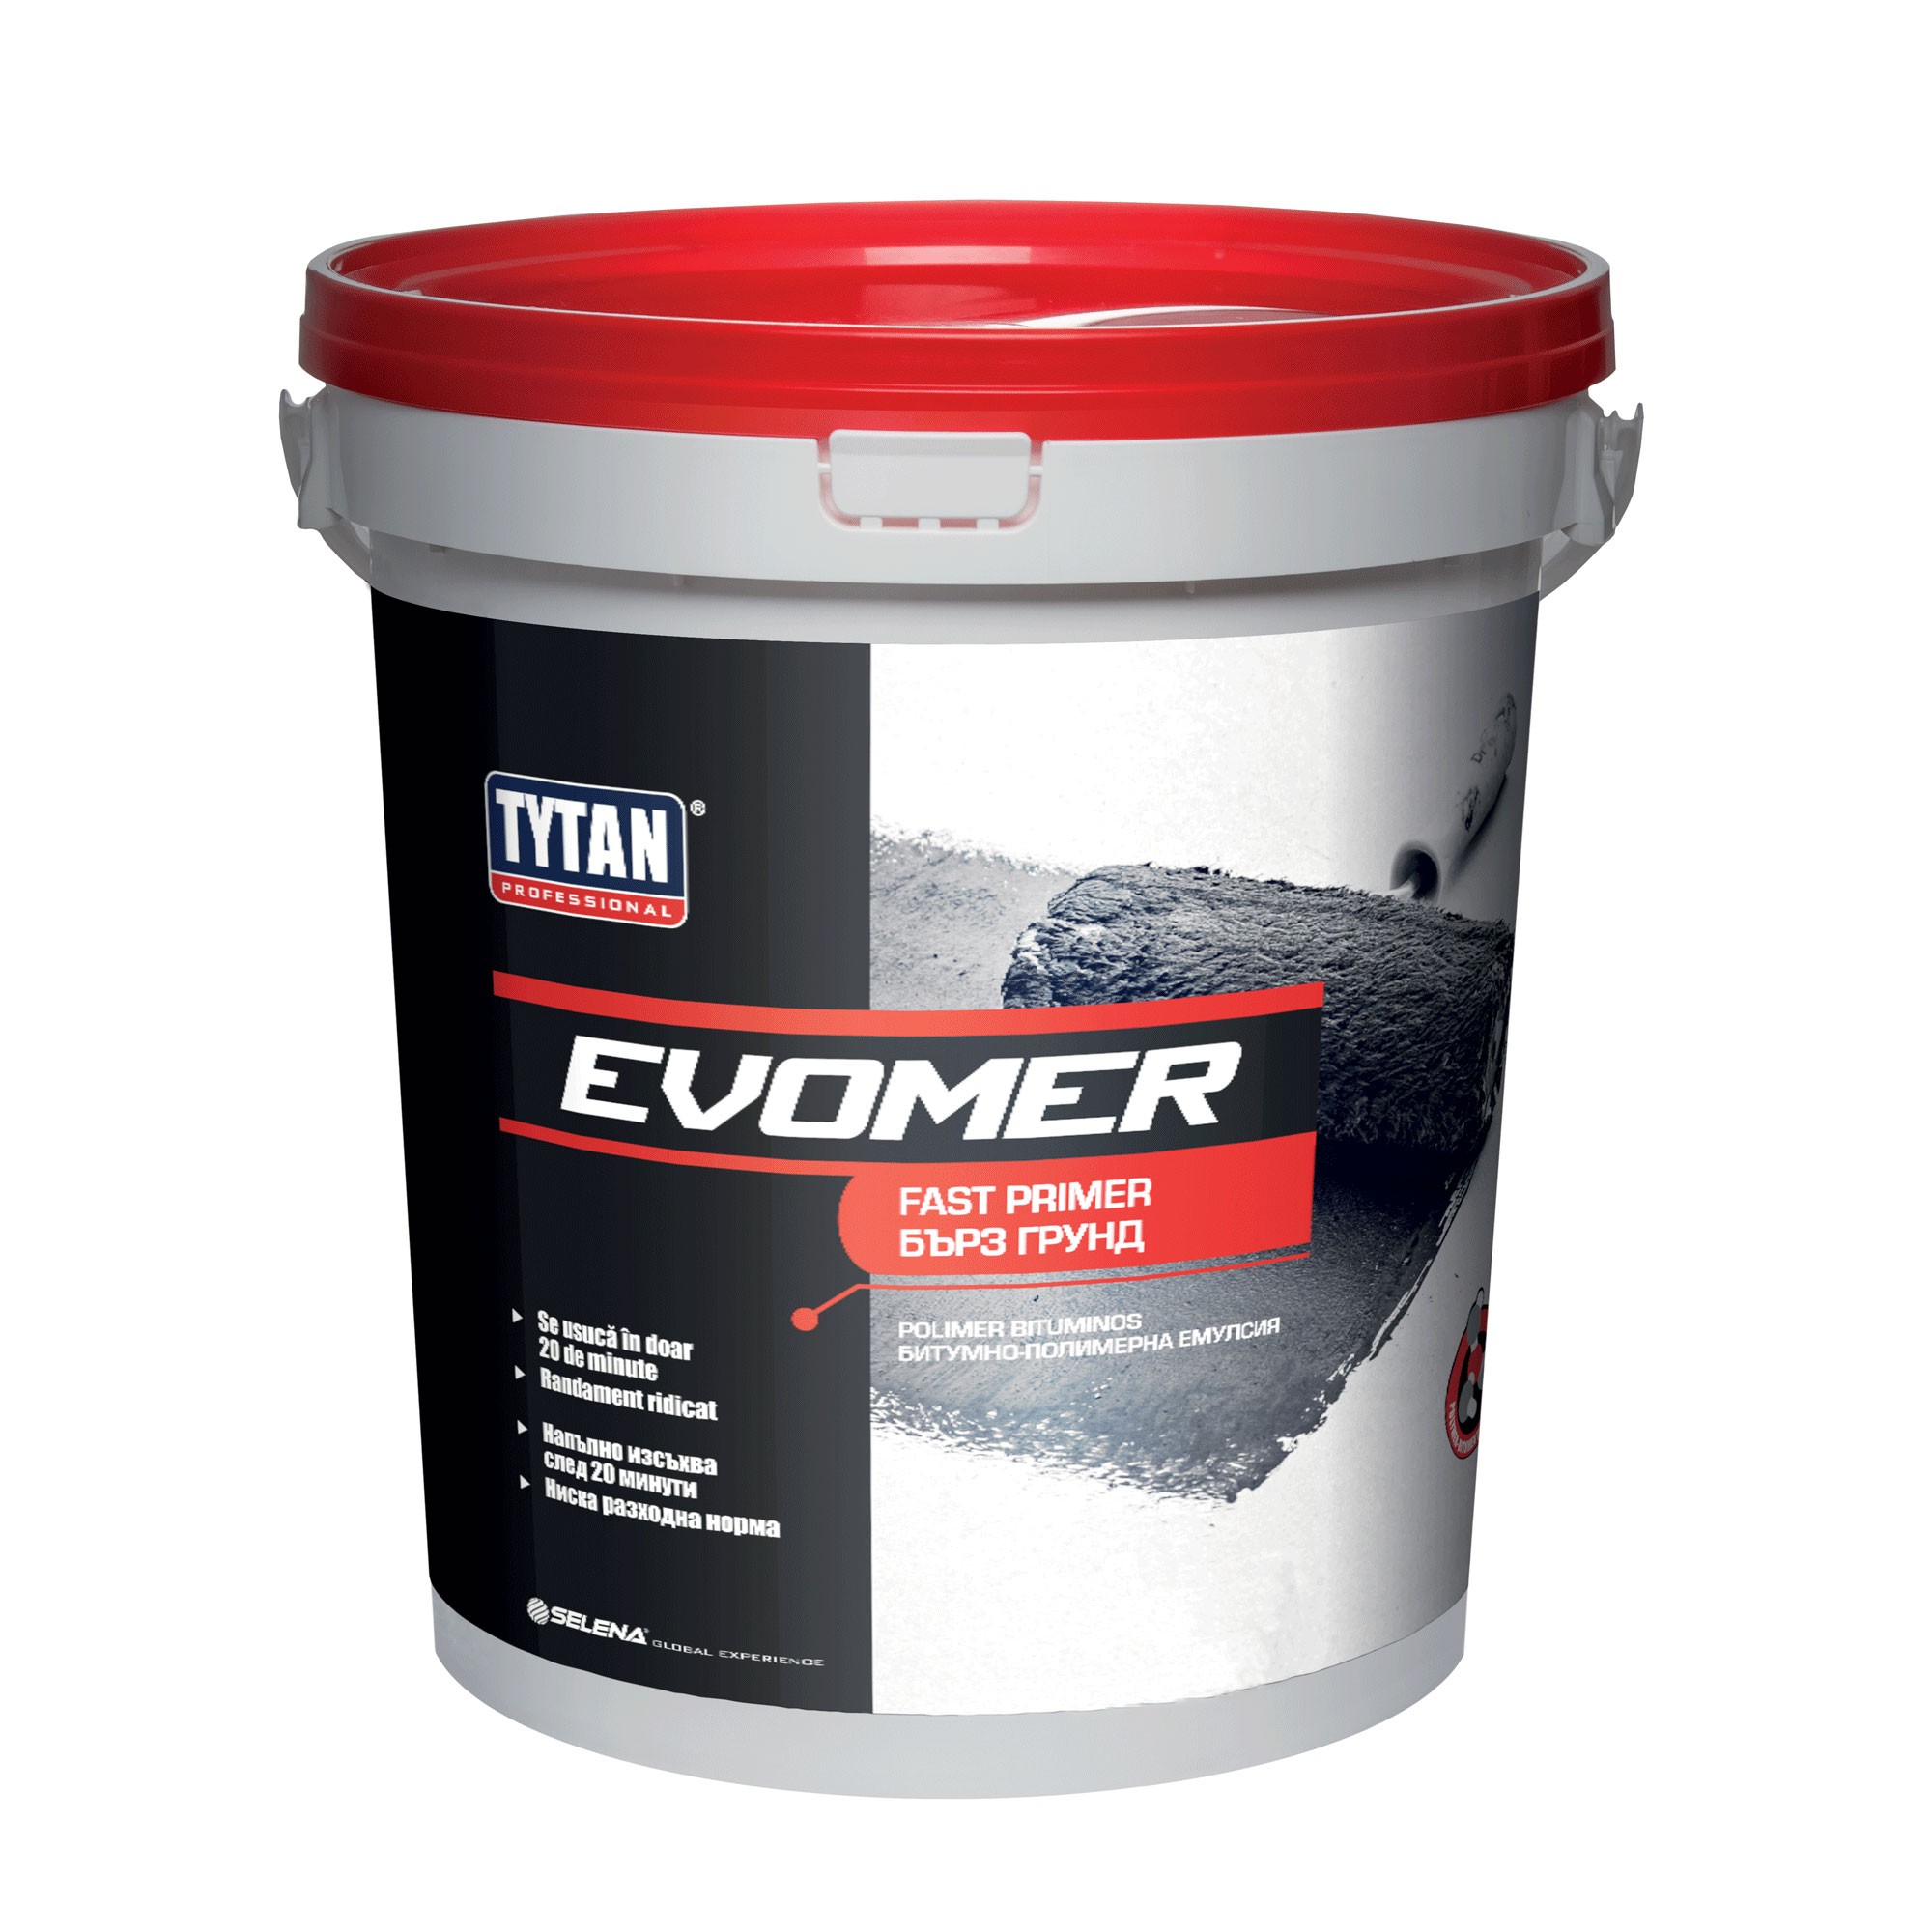 Products for waterproofing and sealing - Quick primer for waterproofing roof Evomer Fast Primer Tytan Professional 9kg, maxbau.ro